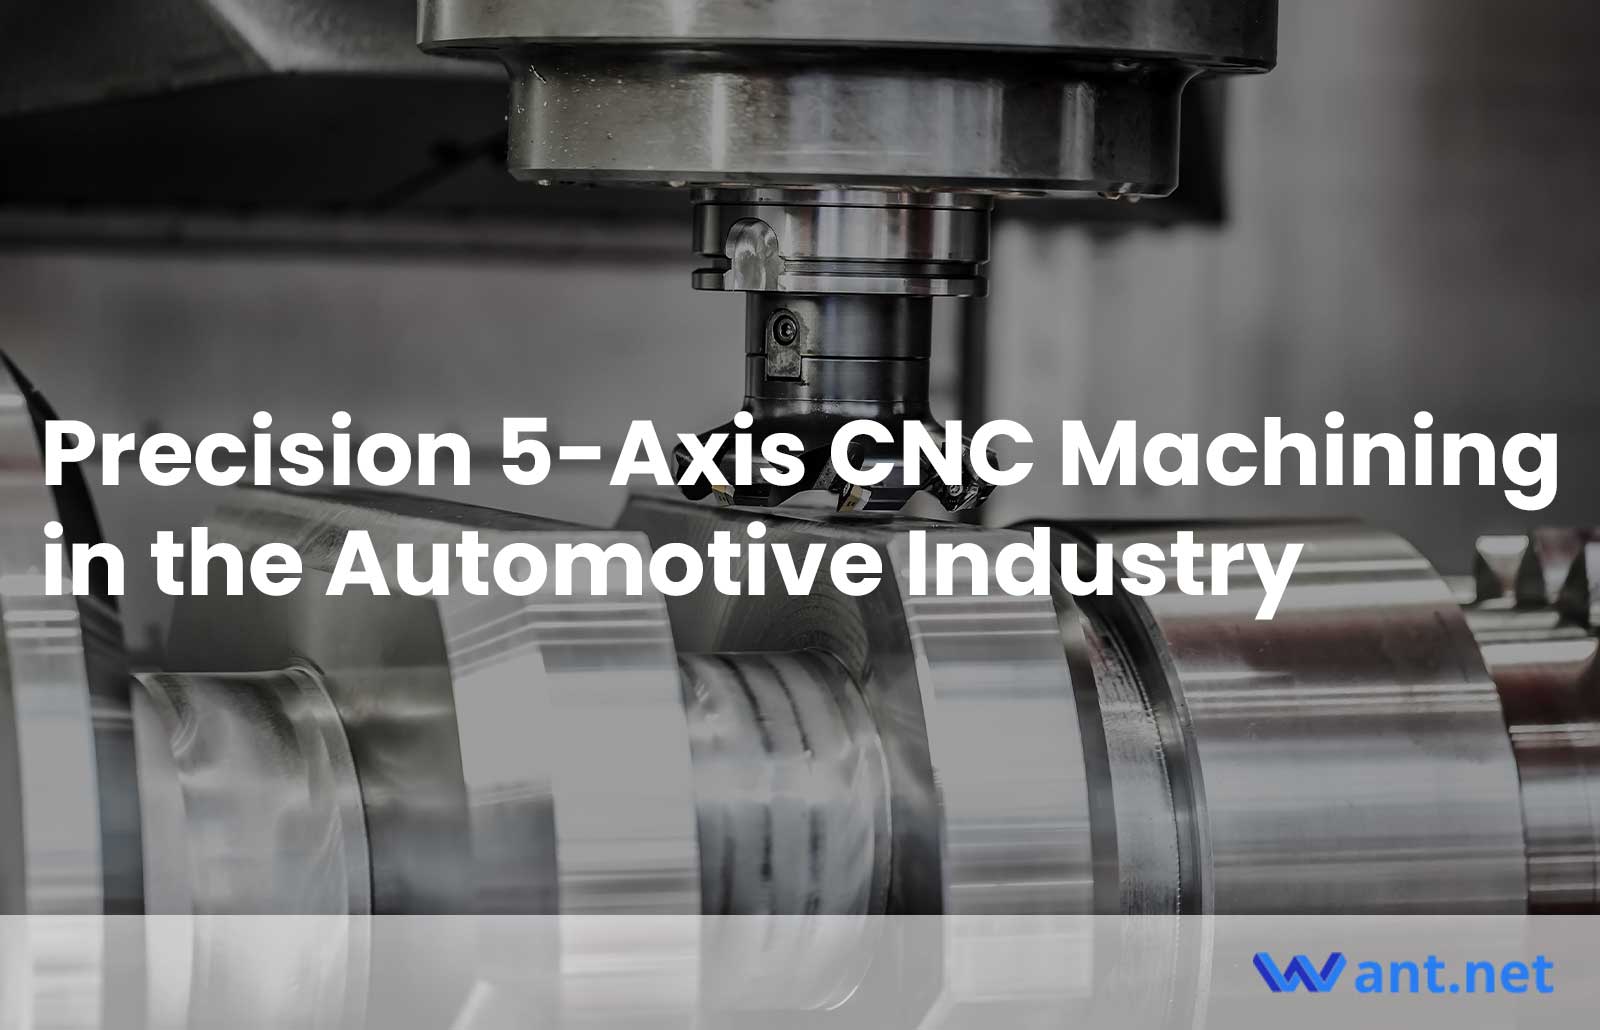 Precision 5-Axis CNC Machining in the Automotive Industry